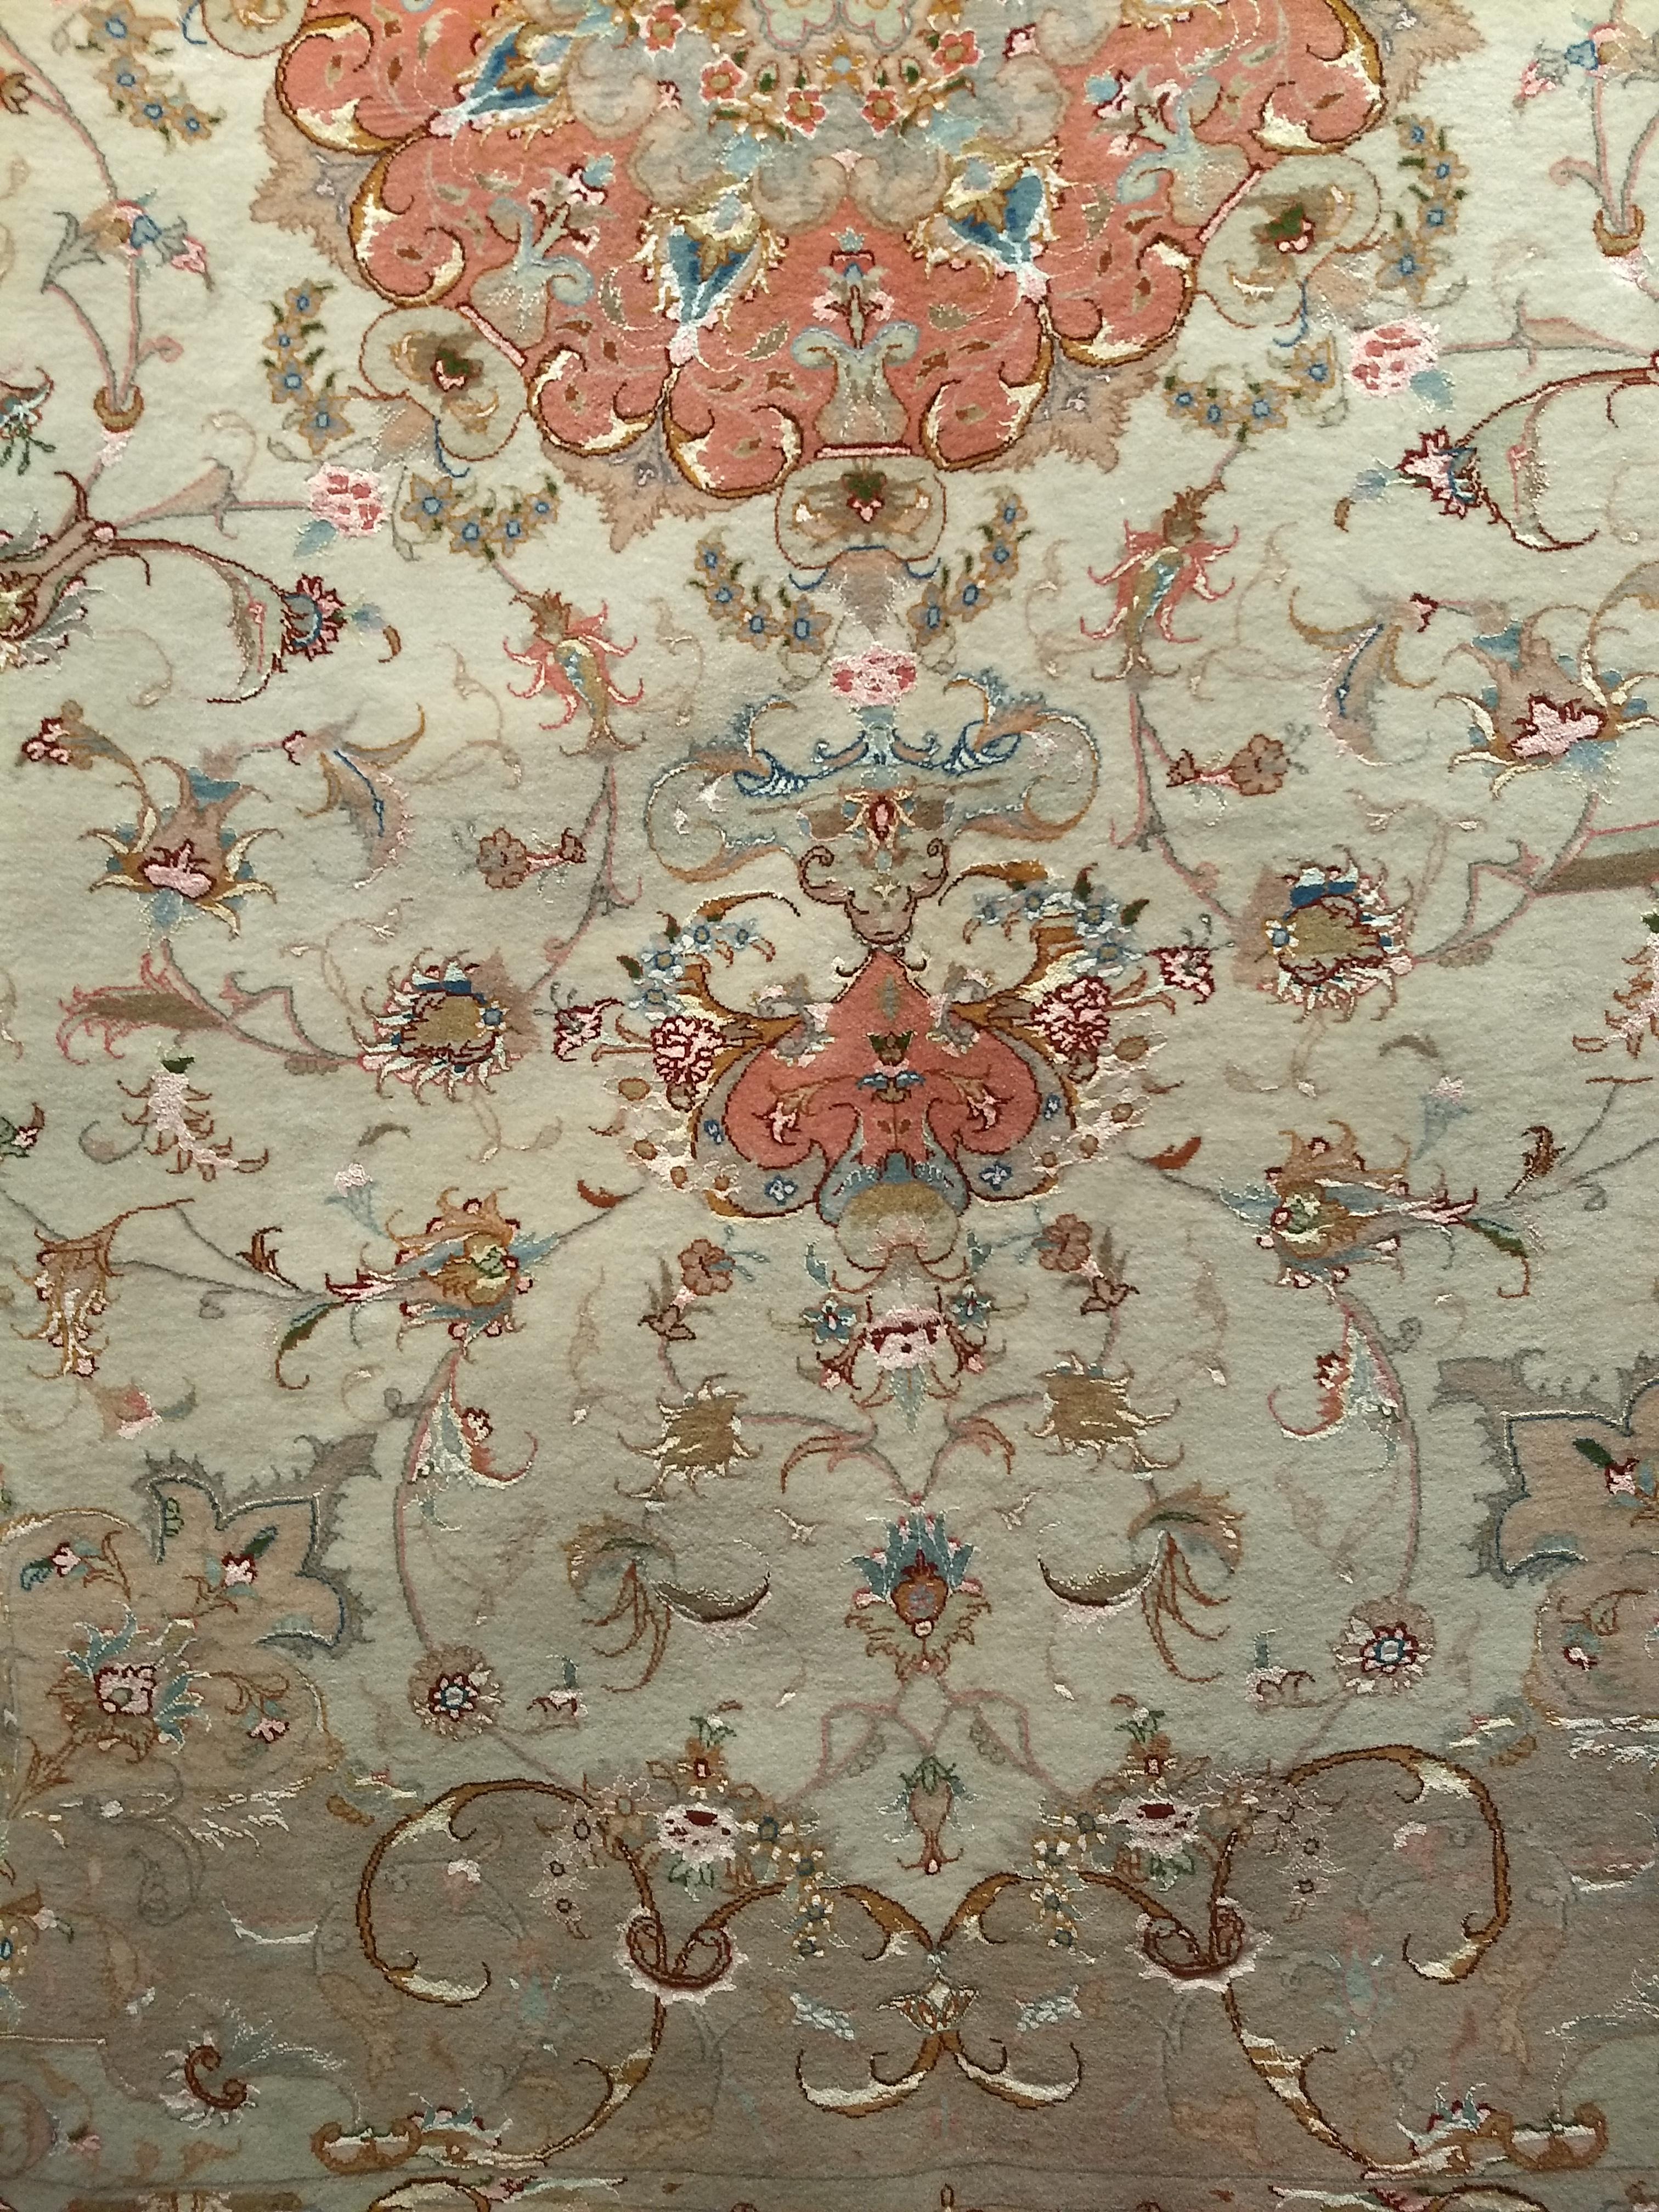 Finely Woven Persian Tabriz Room Size Rug in Floral Pattern in Ivory, Salmon In Excellent Condition For Sale In Barrington, IL